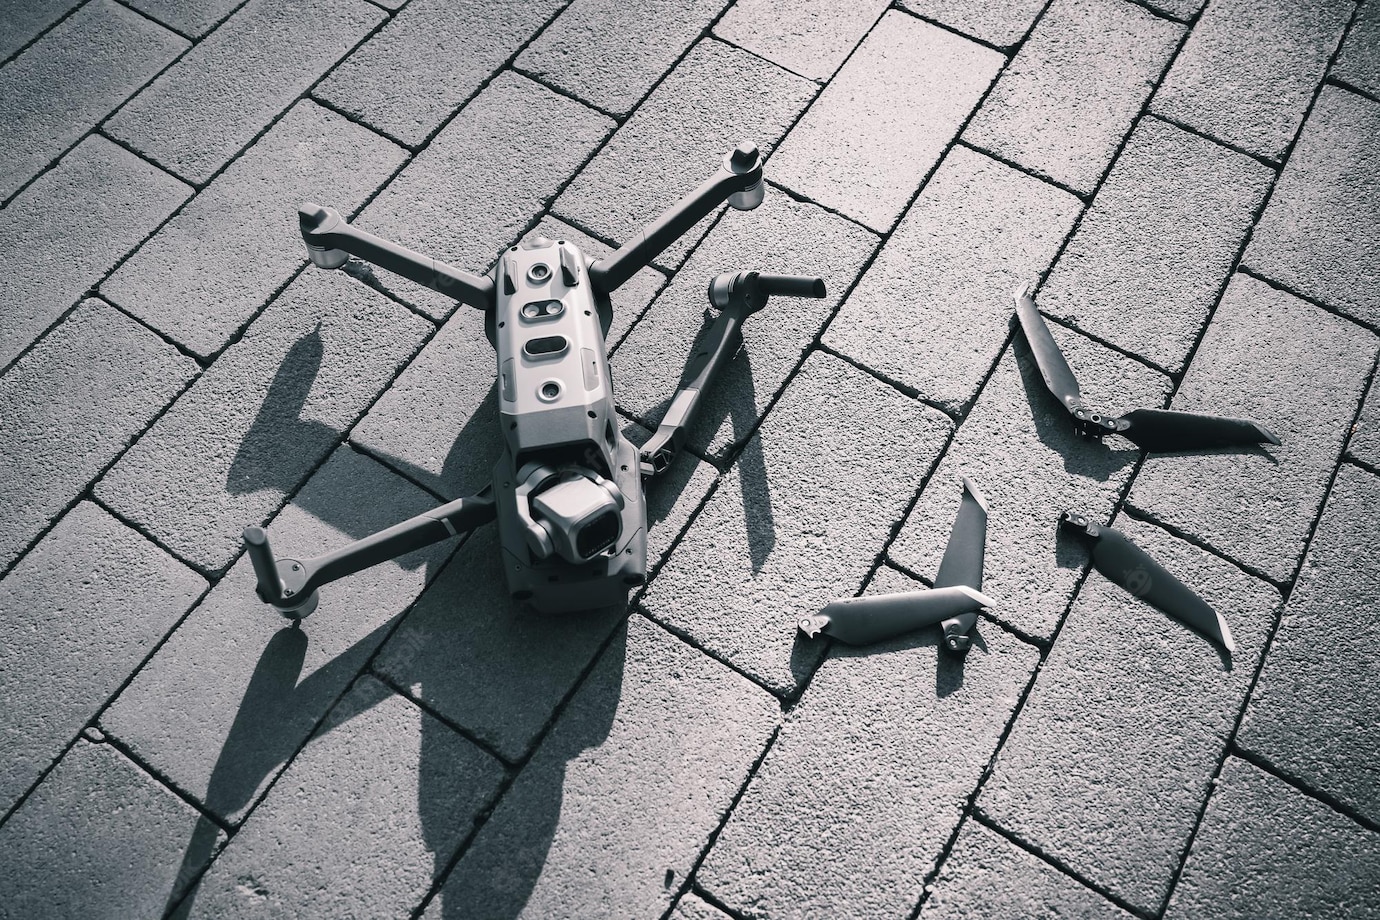 A broken drone on the ground